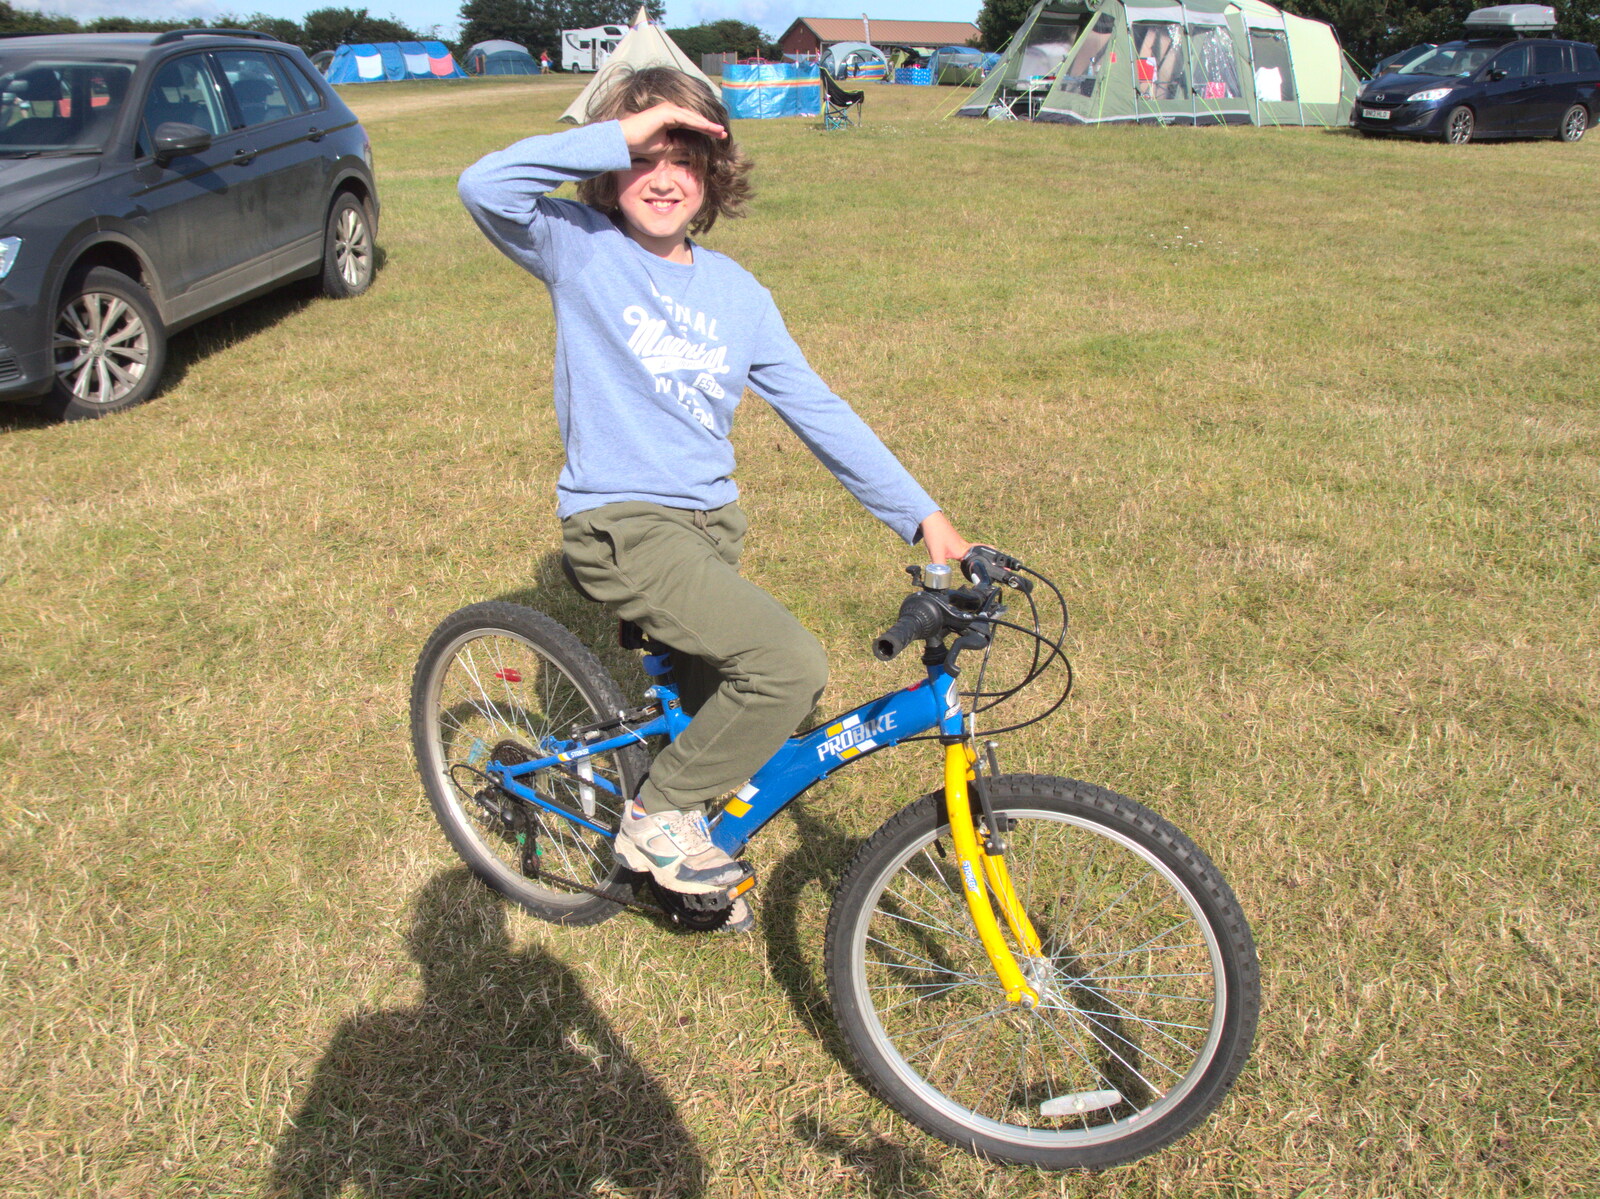 Fred on his bike from Camping on the Coast, East Runton, North Norfolk - 25th July 2020